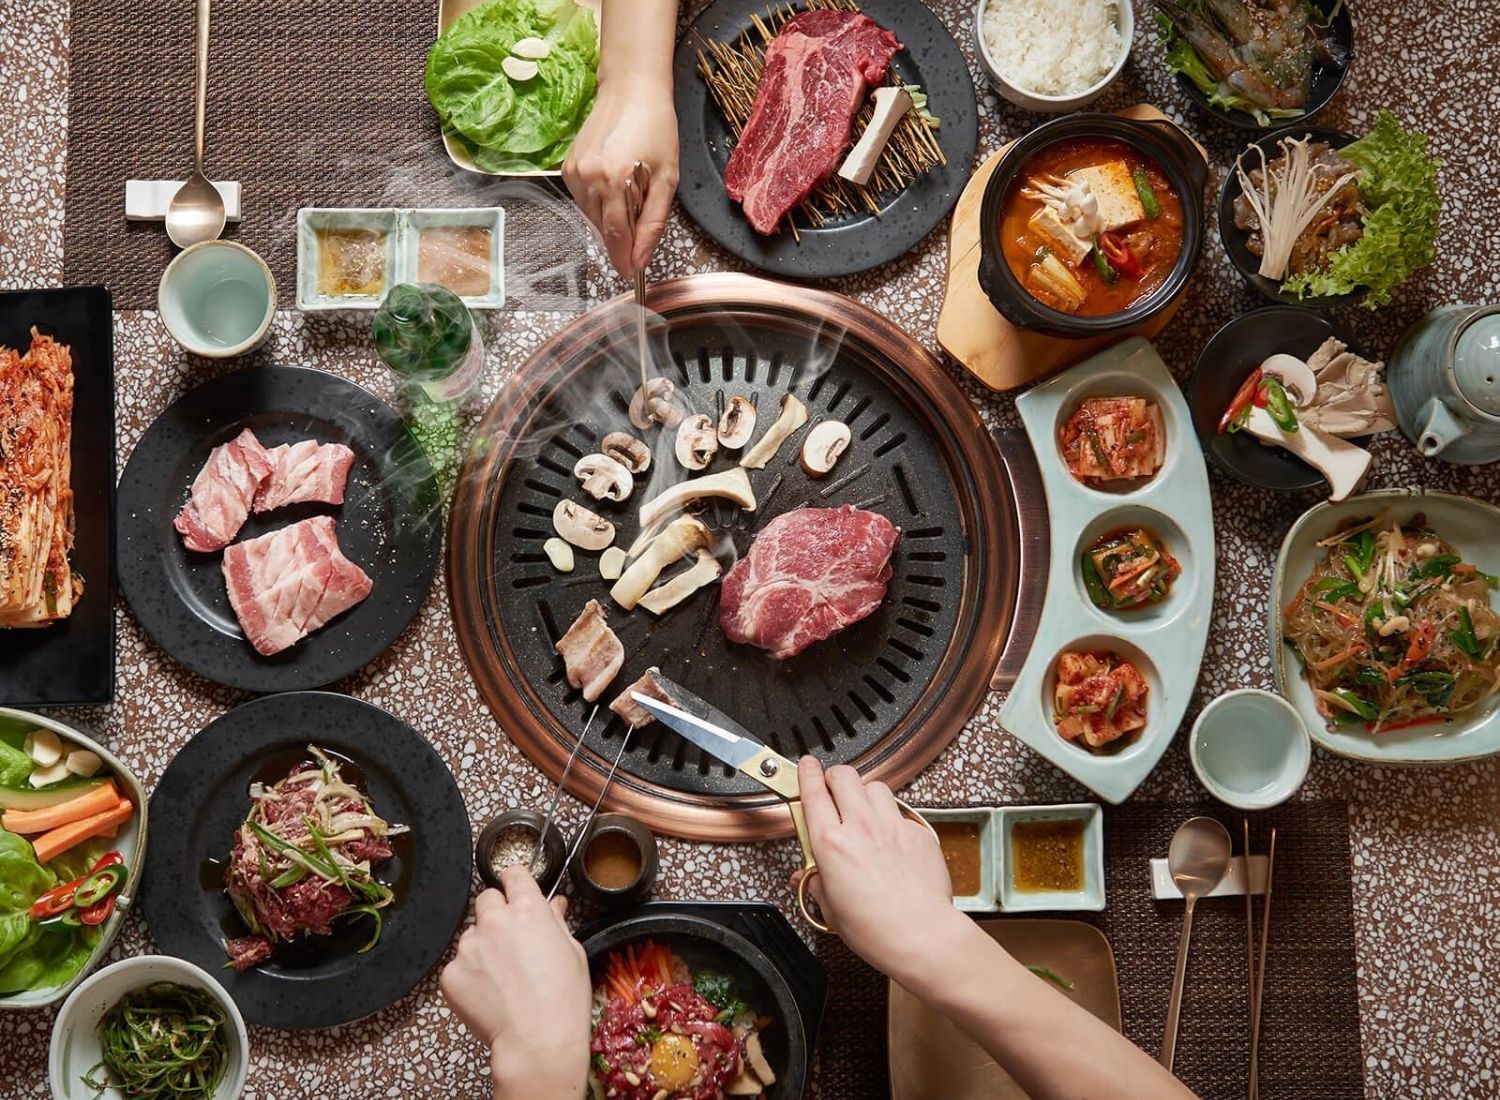 15 Popular Korean Dishes To Refresh Your Taste Buds!